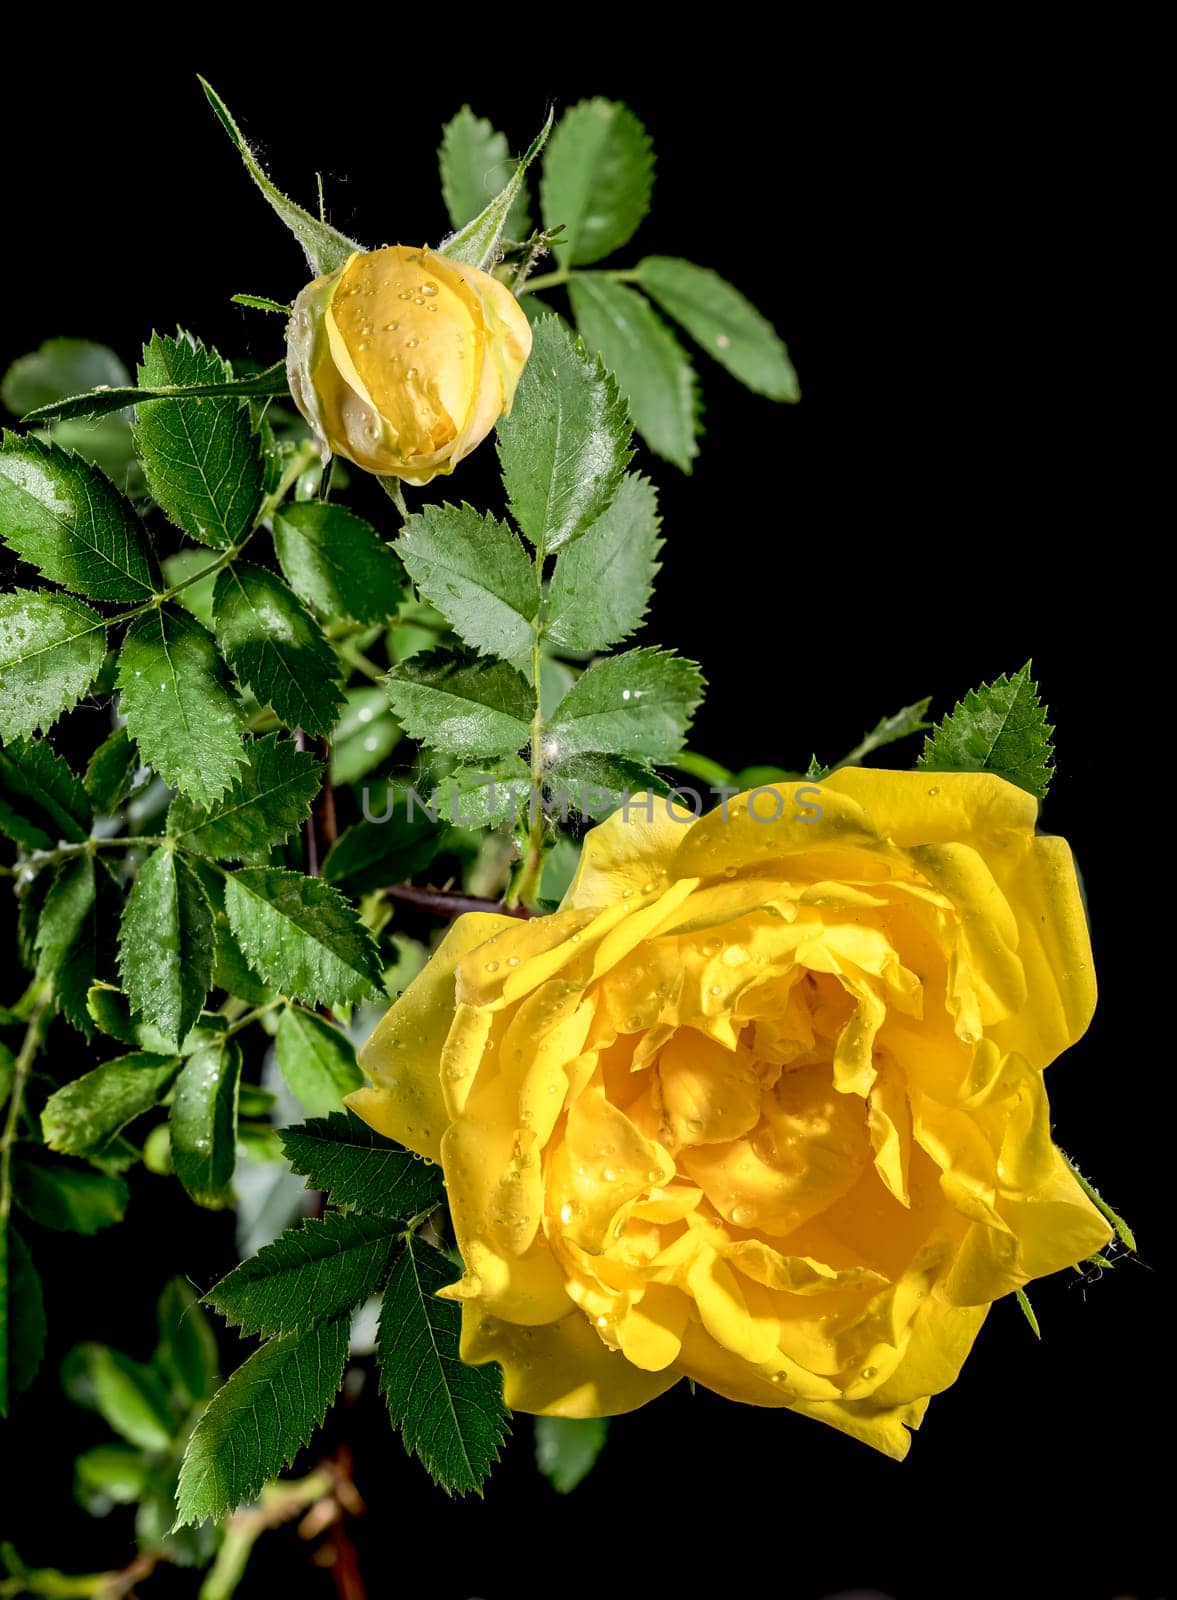 Blooming yellow Climbing rose Golden Showers on a black background by Multipedia